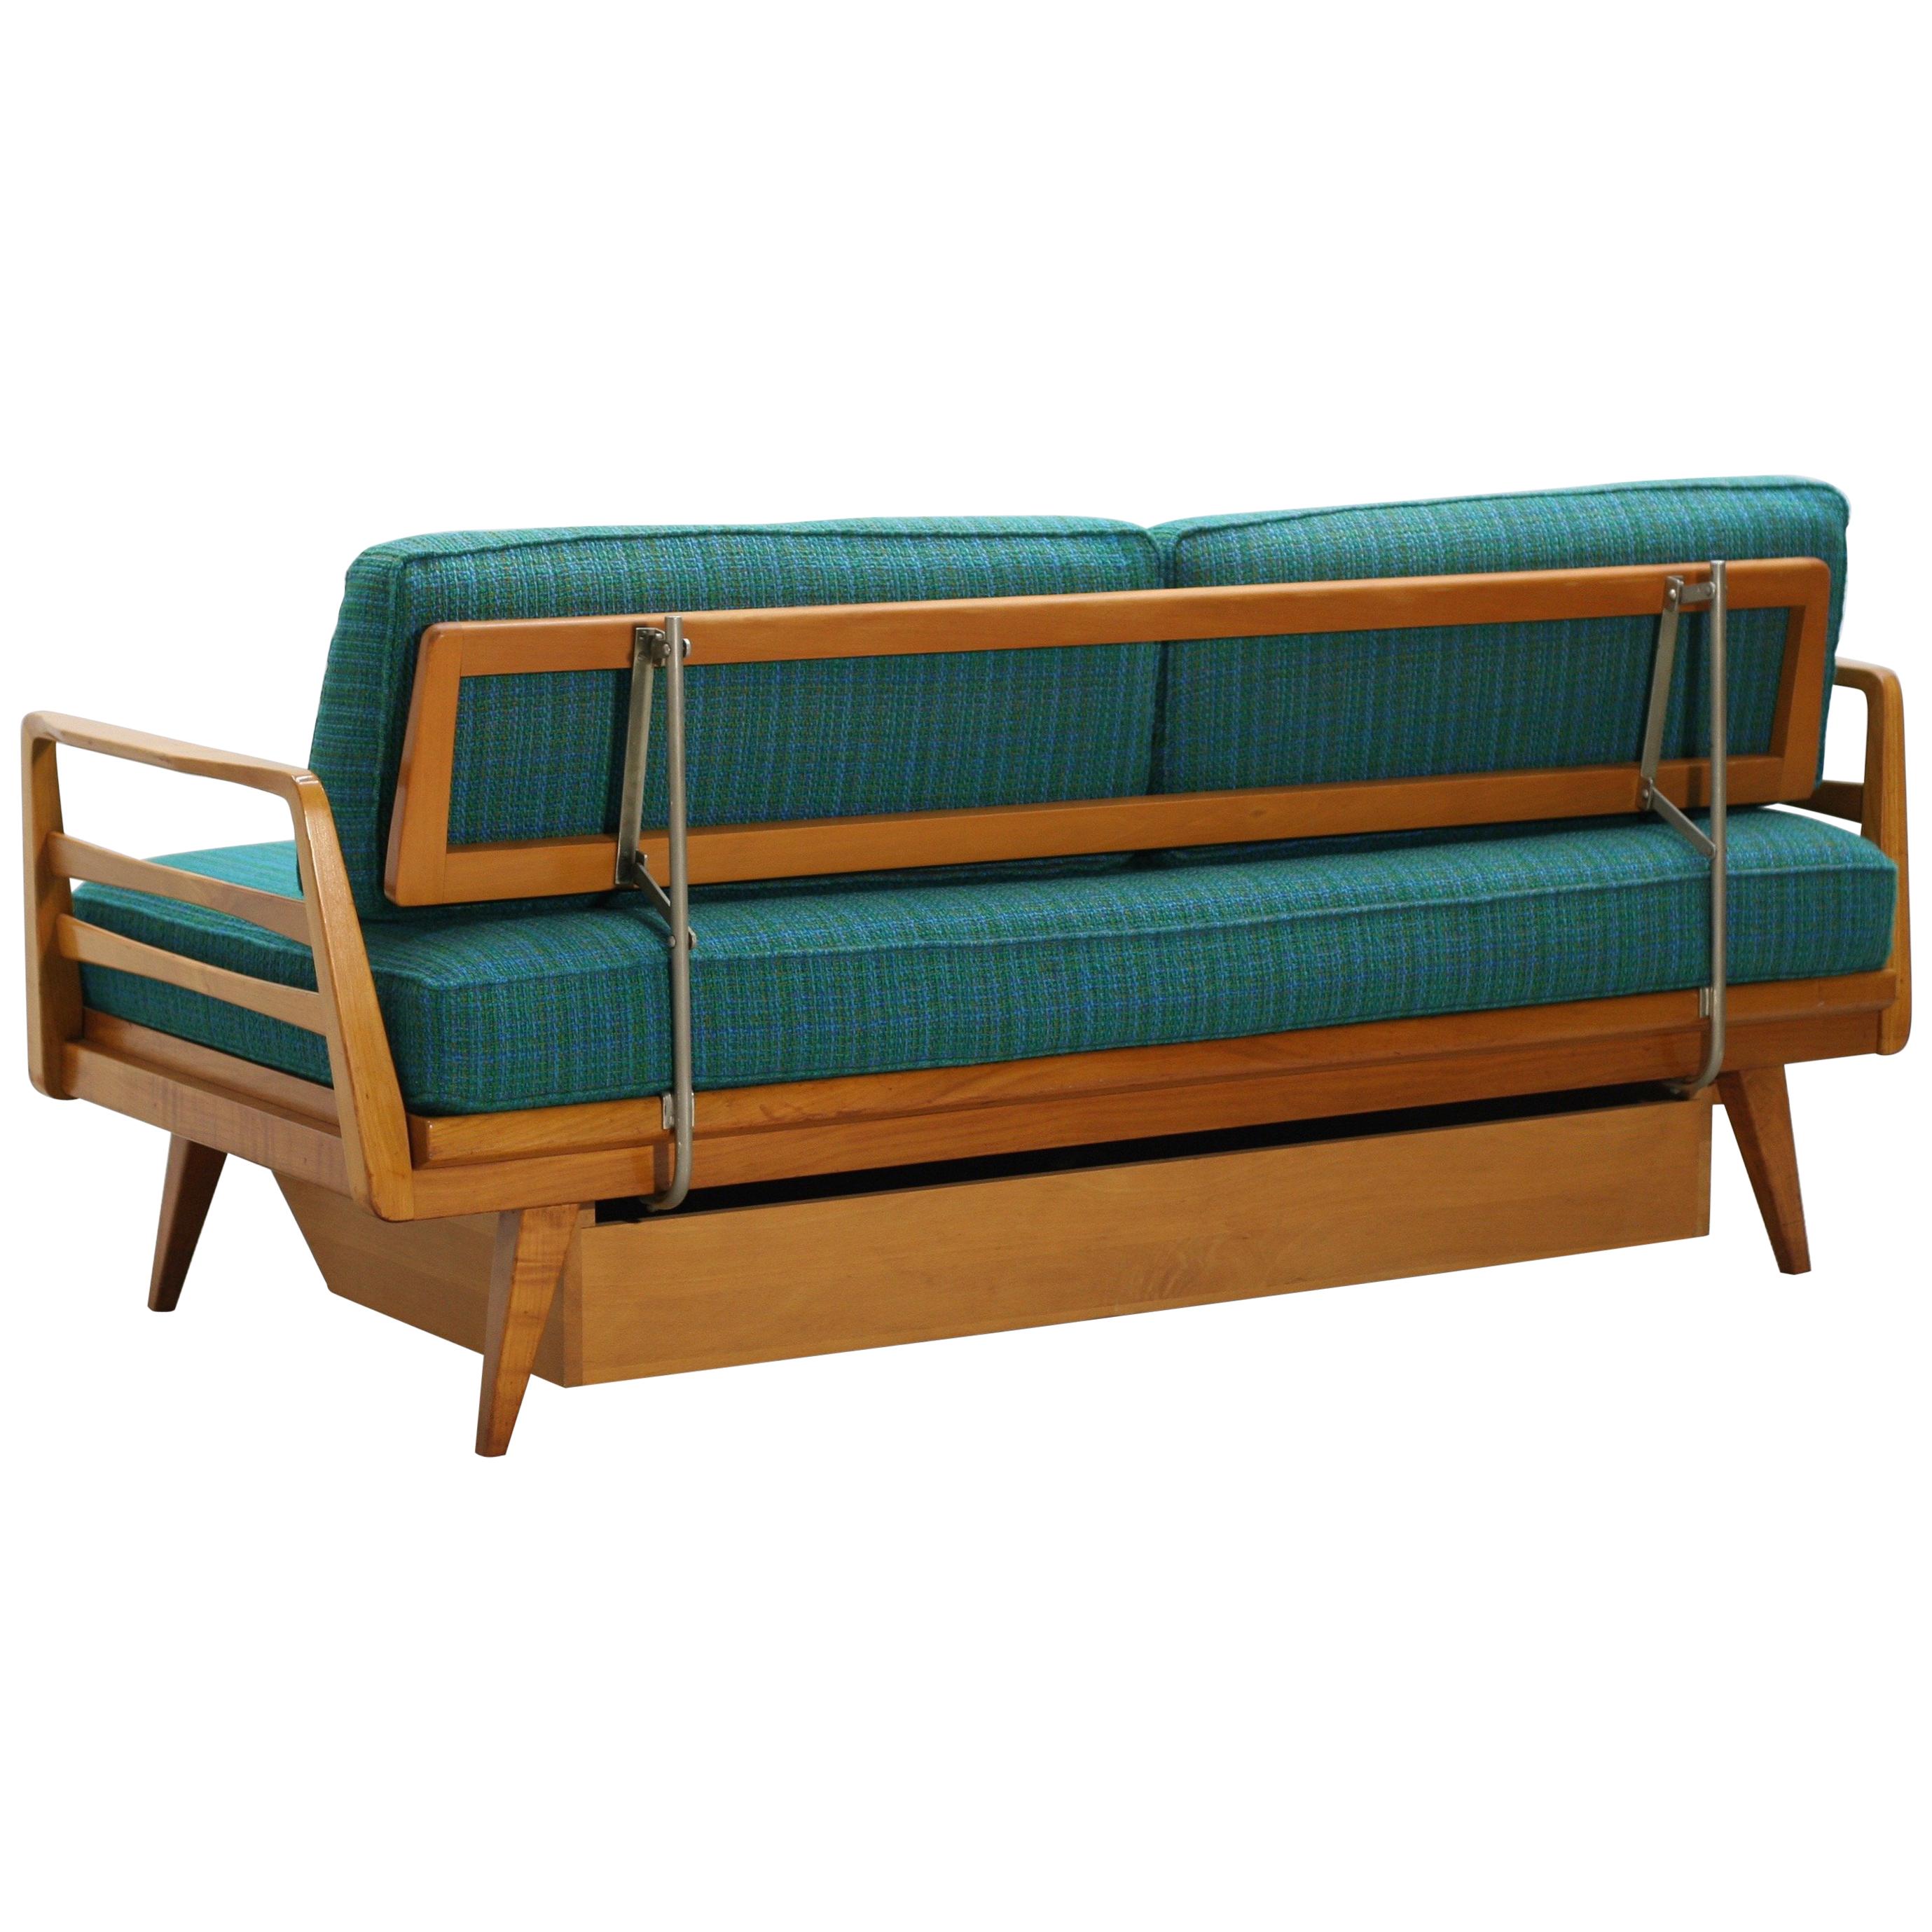 MidCentury German Extendable Beech Wood Daybed Sofa from Knoll Antimott, 1950s For Sale